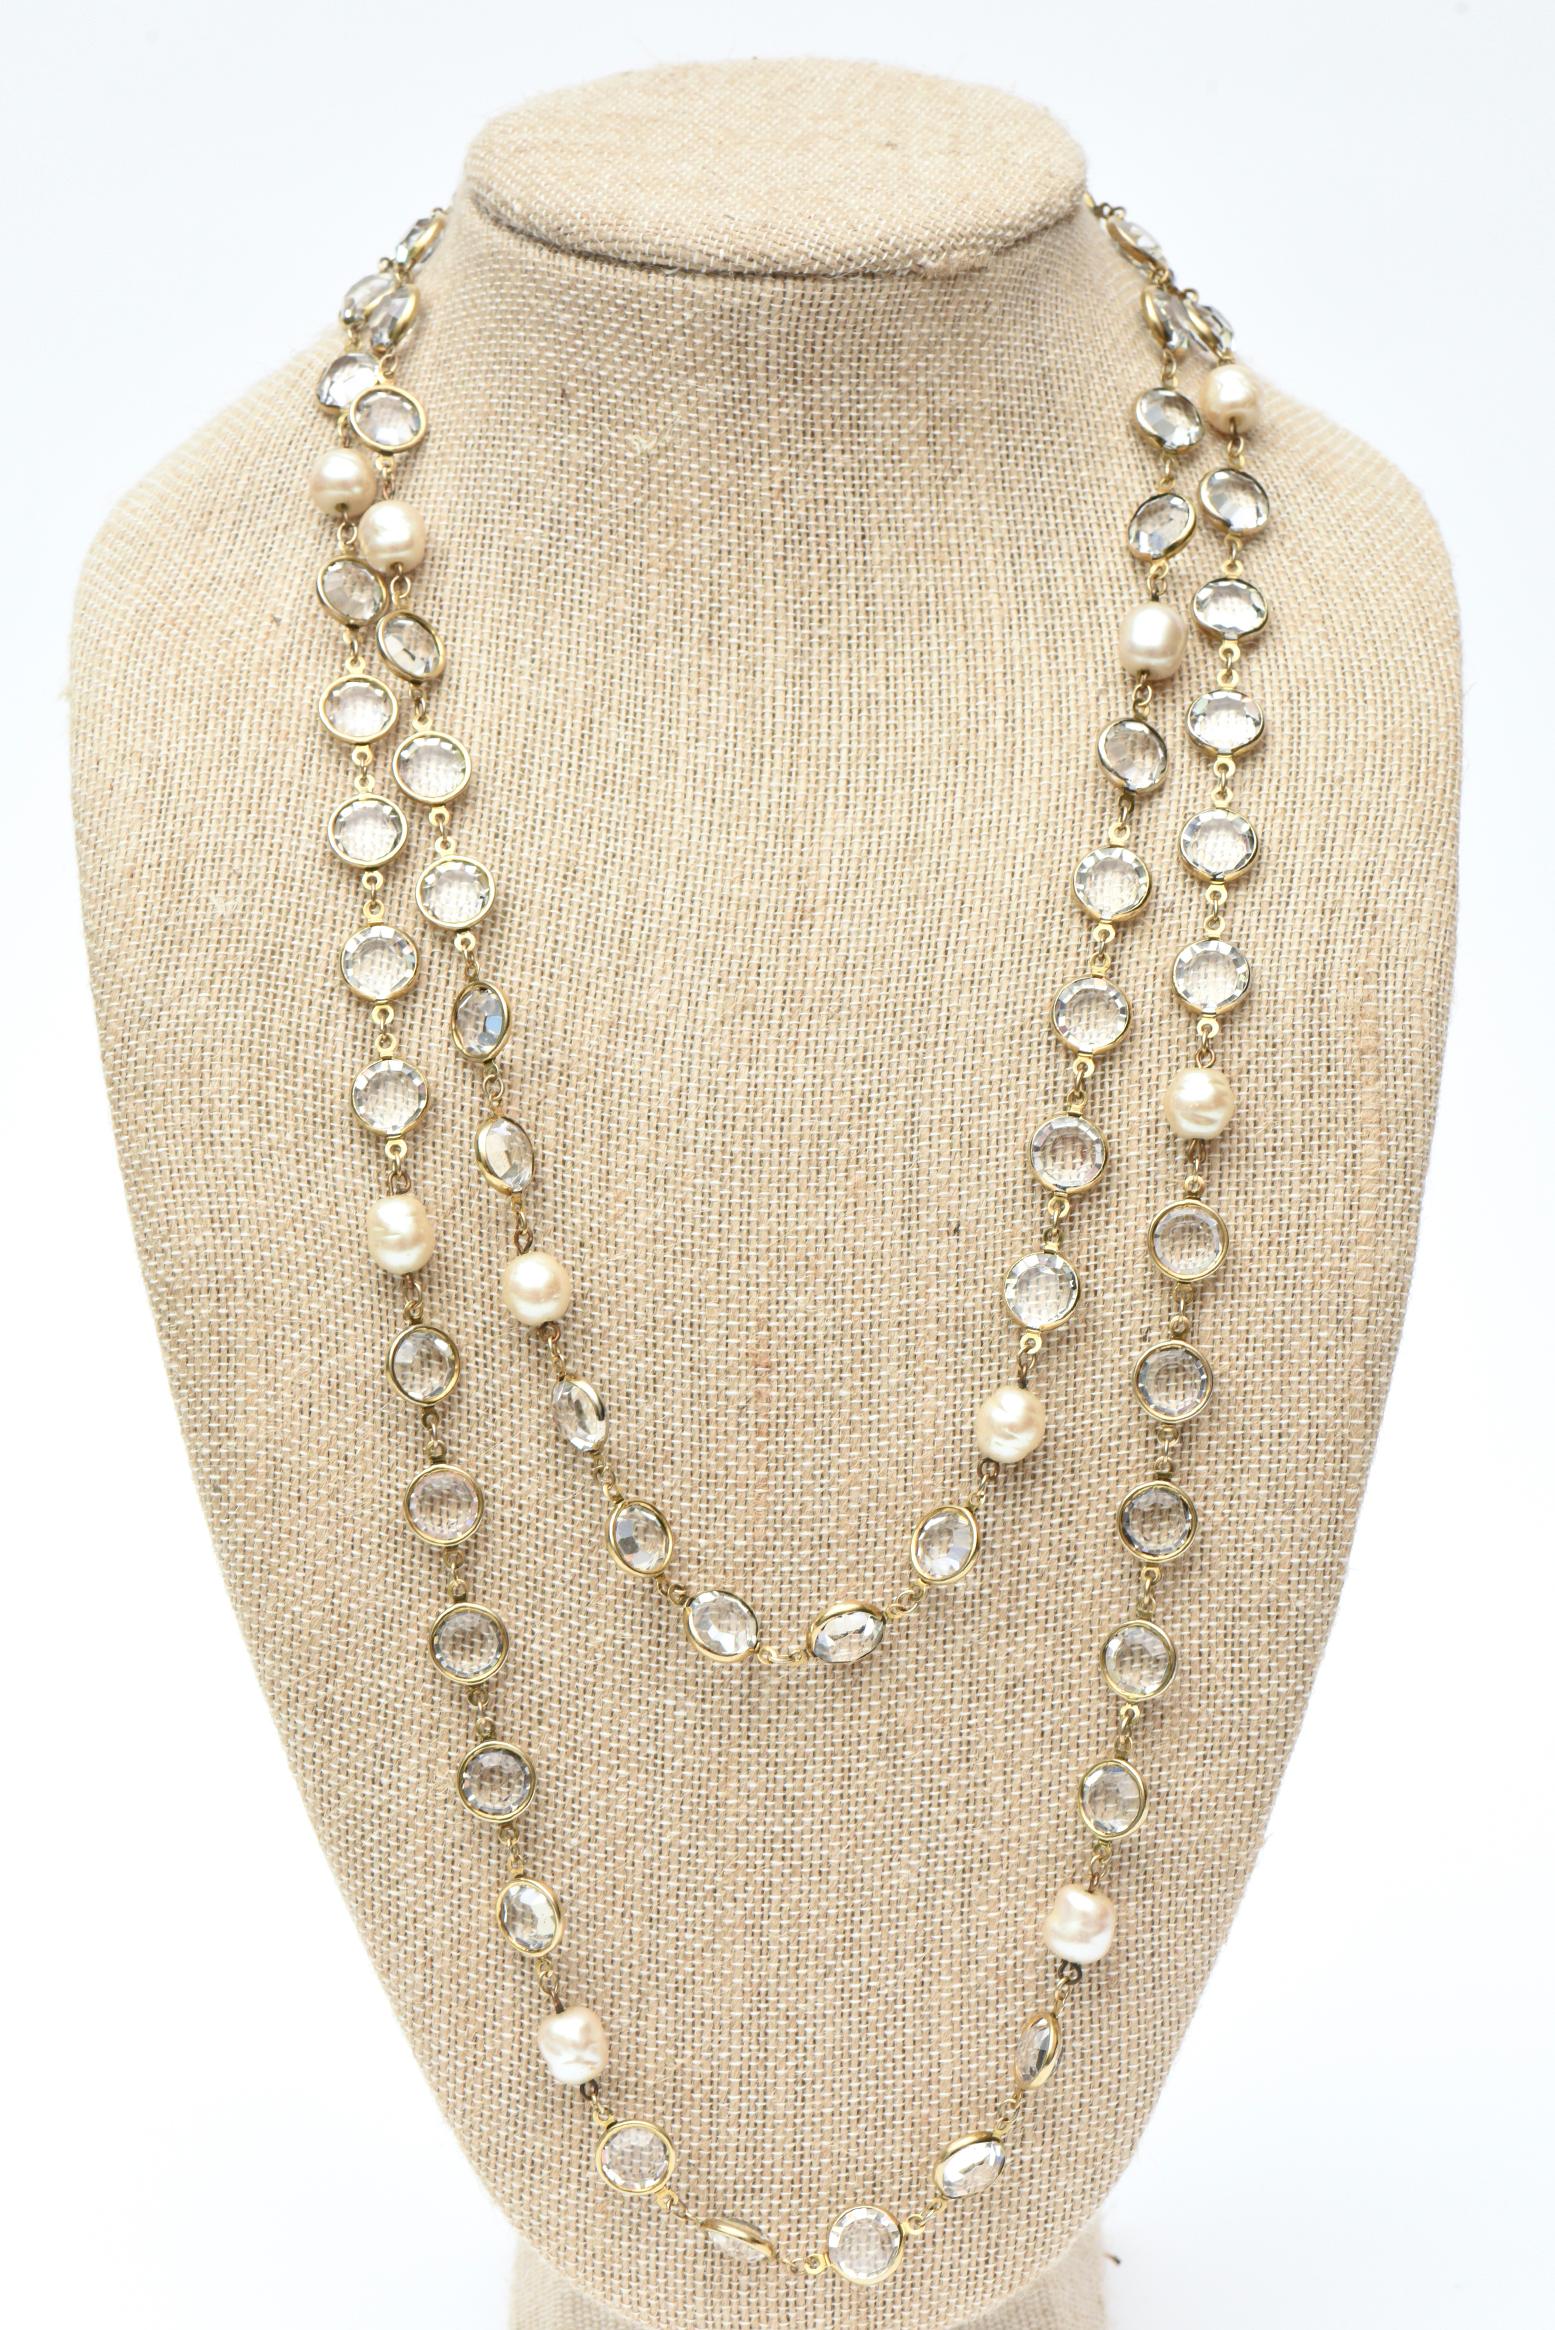 Chanel Vintage Faux Pearl and Bevel Clear Crystal Wrap Necklace In Good Condition For Sale In North Miami, FL